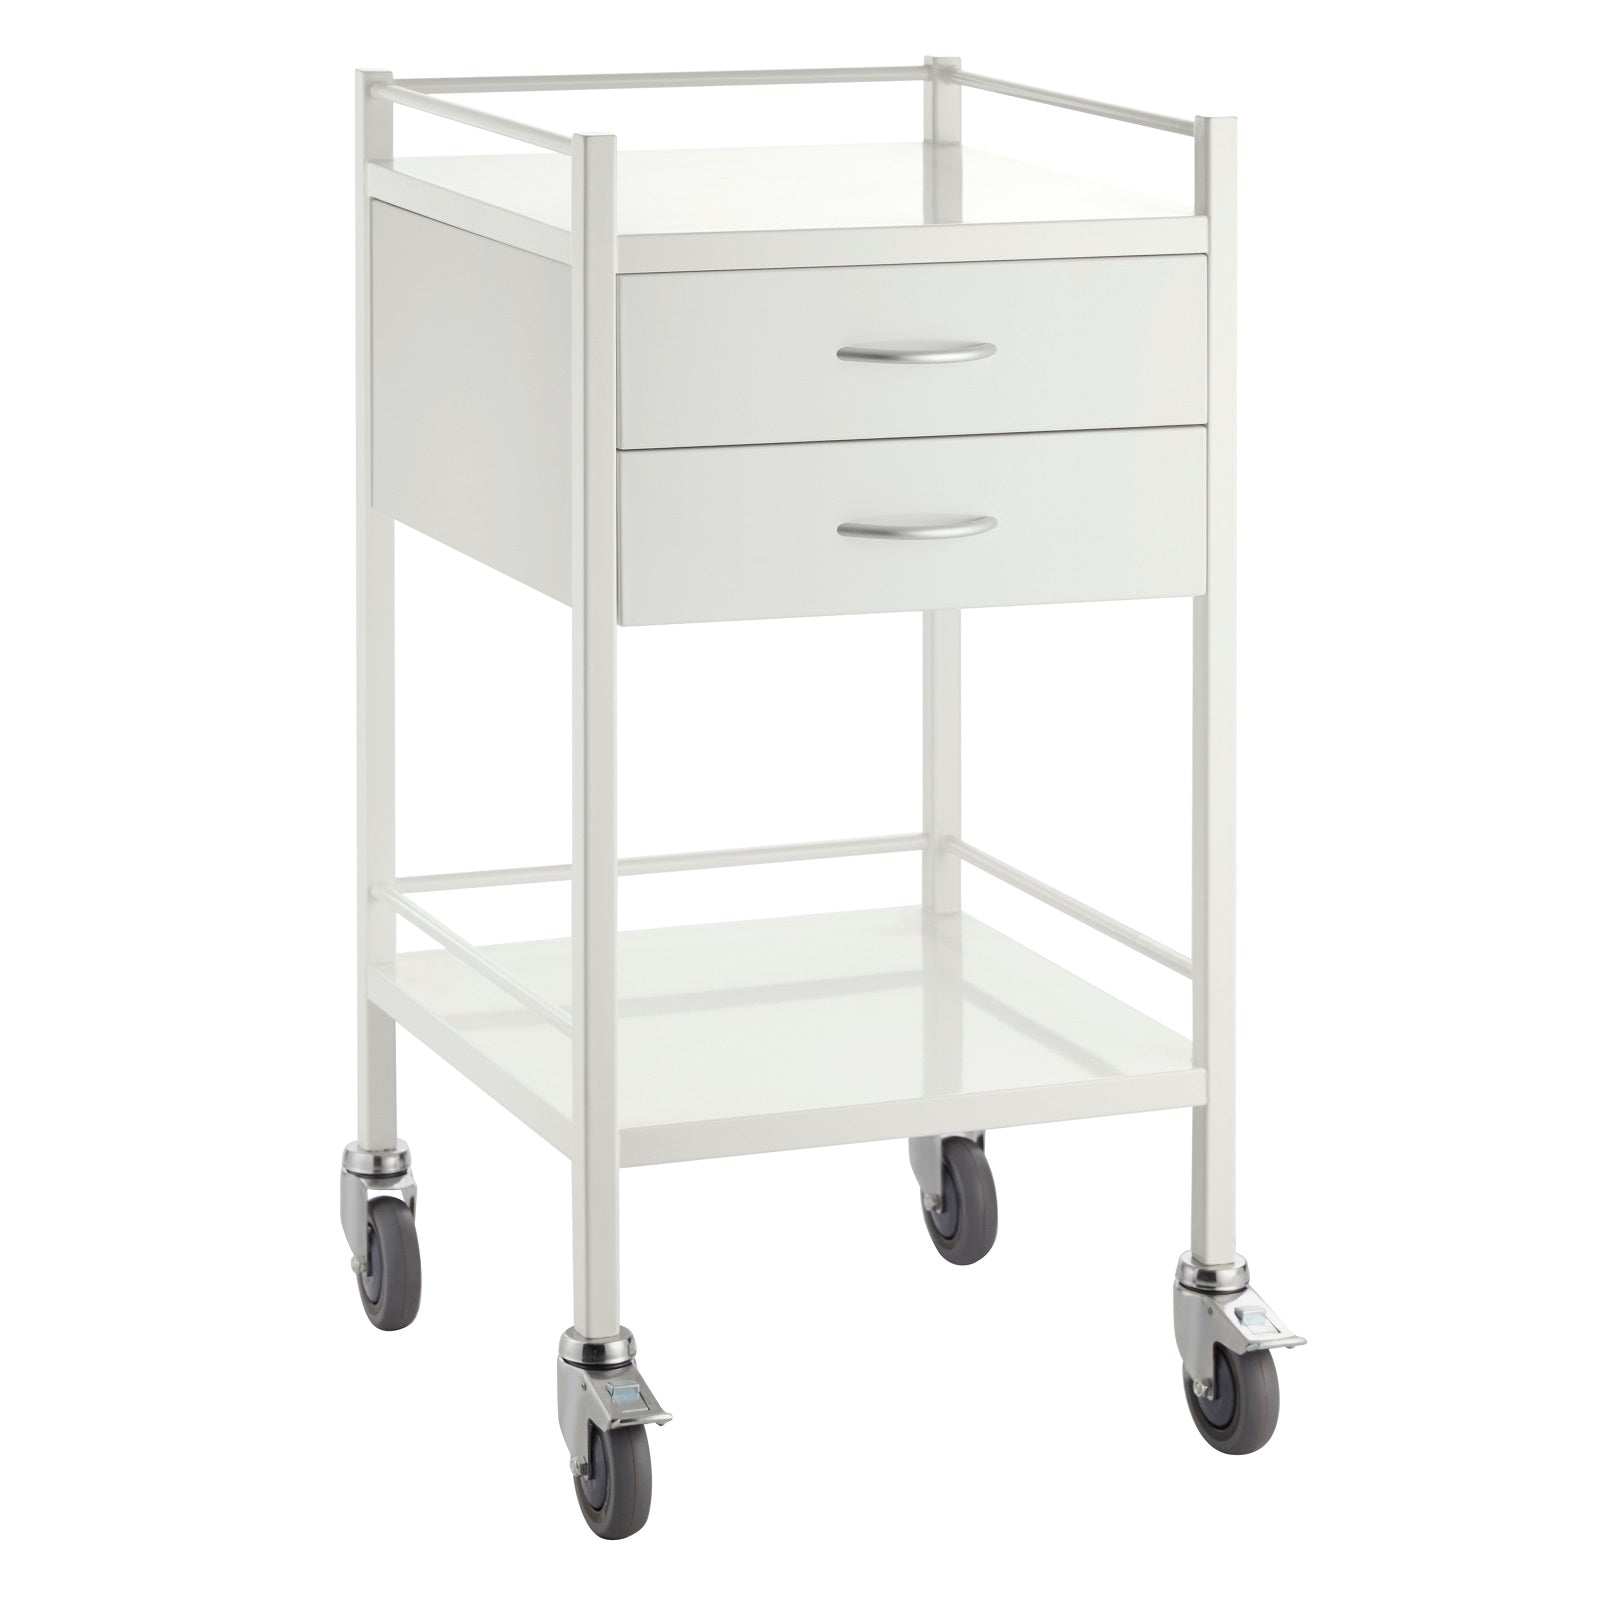 With smooth castors and an outstanding finish our two drawer powder coated trolley is a great alternative to stainless.